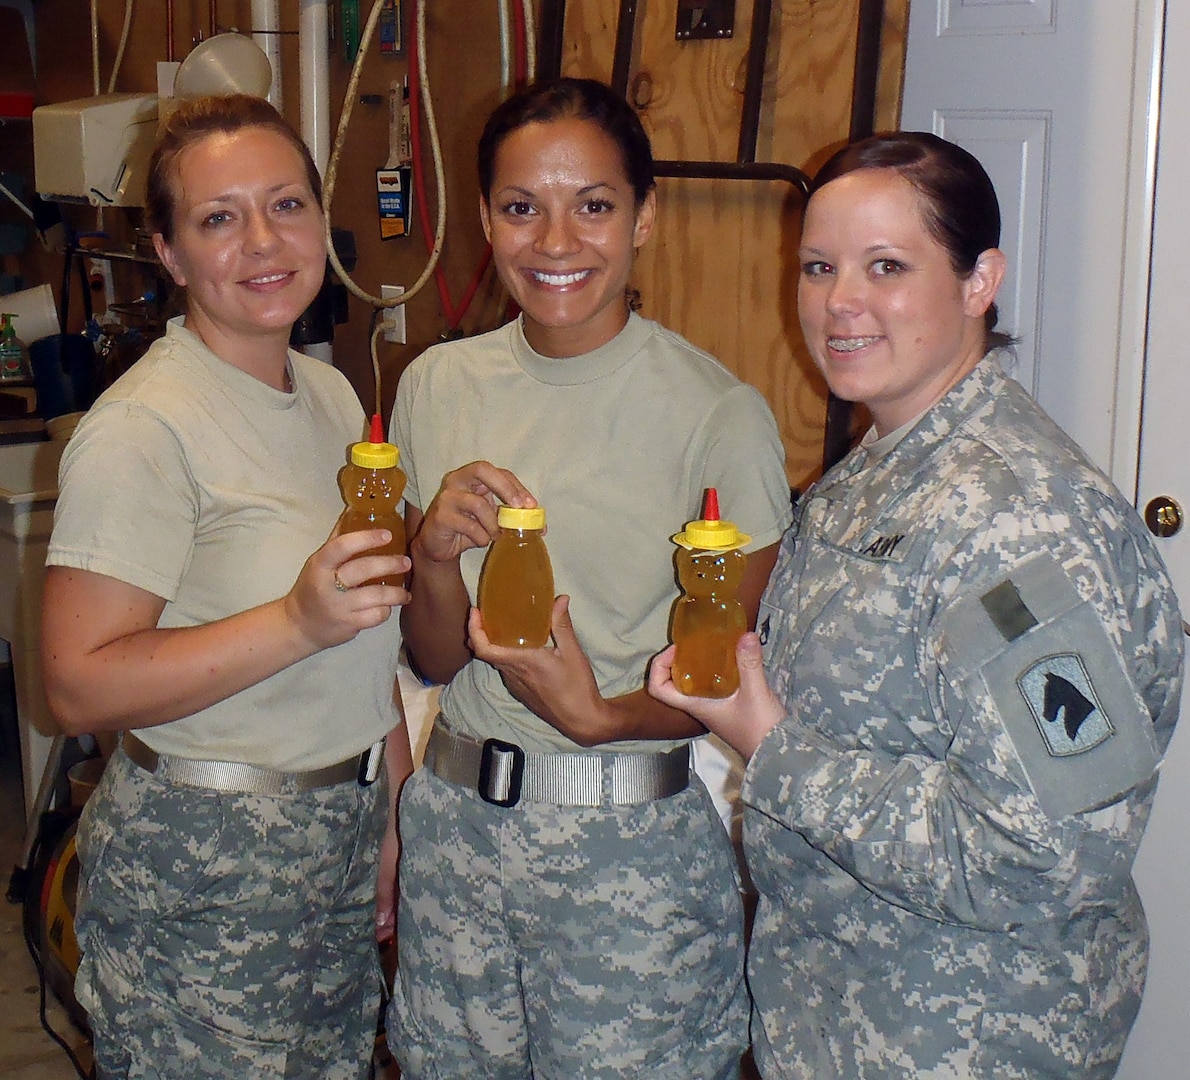 Kentucky Guard members Army Sgt. 1st Class Crystal Dunn, Army Capt. Varinka Barbini and Army Staff Sgt. Catherine Corson, of Agribusiness Development Team 4, hold bottles of honey they processed while training with Jim Cline, a retired chief warrant officer 4 who served more than 30 years in the Kentucky Guard as an aviator. The Guard members are scheduled to deploy next year and teach beekeeping skills as part of the ADT mission to support and impact sustainability and economic development of the Afghan people.